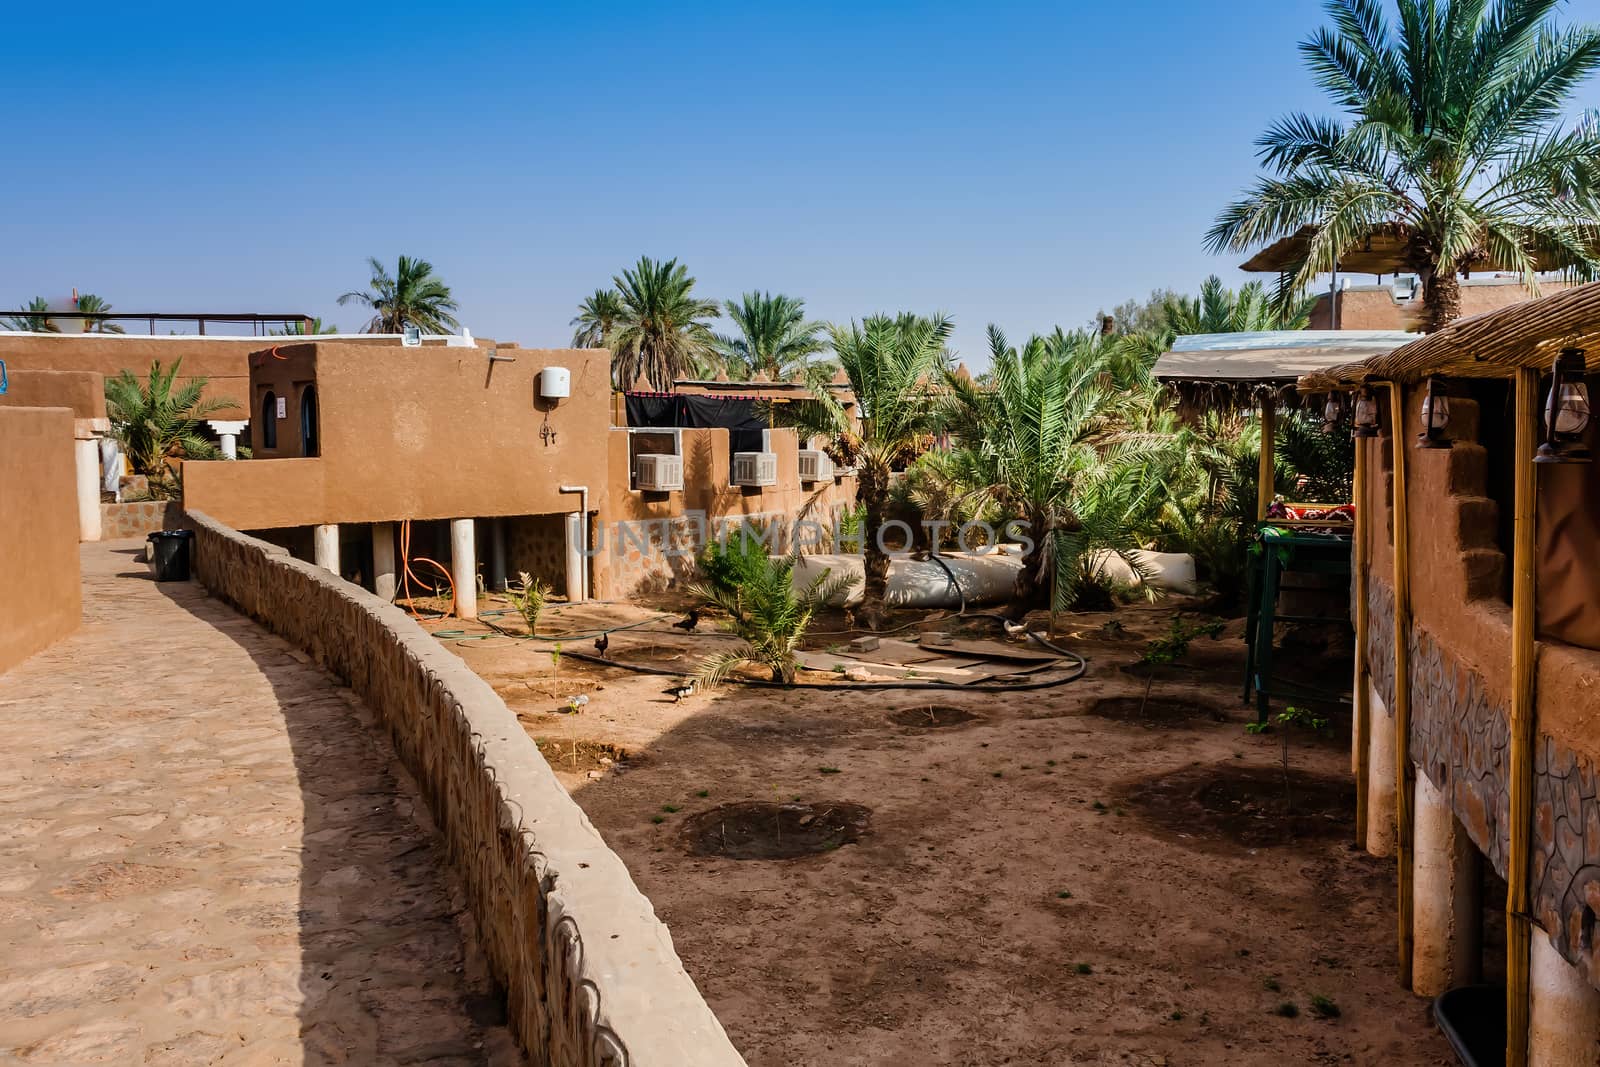 Ushaiqer Heritage Village is a popular tourist attraction some 250 km from Riyadh